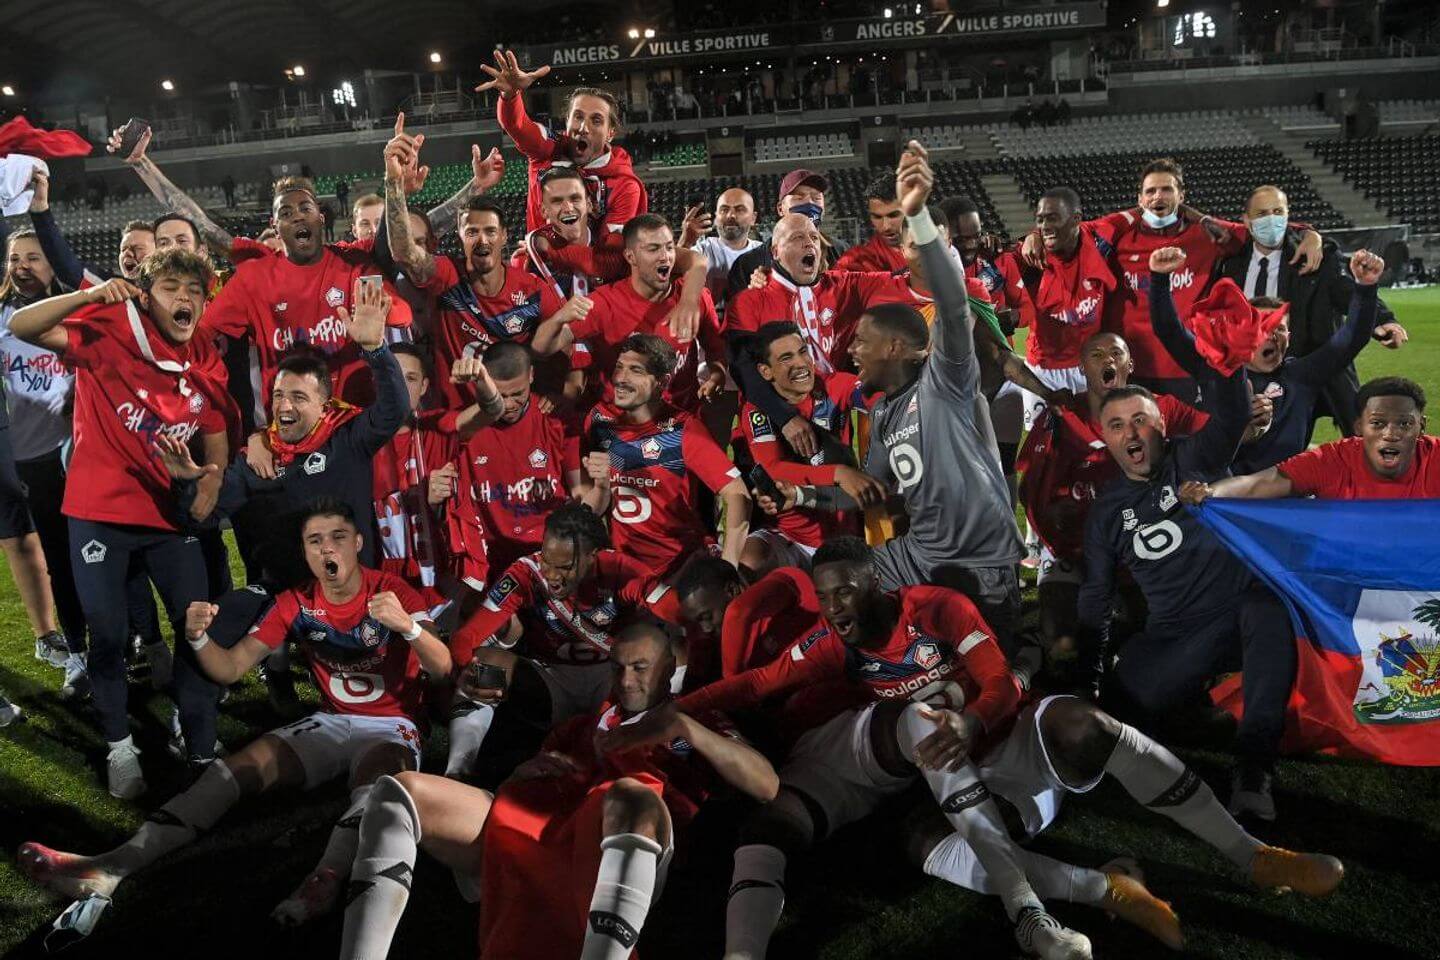 Lille: Christophe Galtier's side crowned Ligue 1 champions ahead of PSG